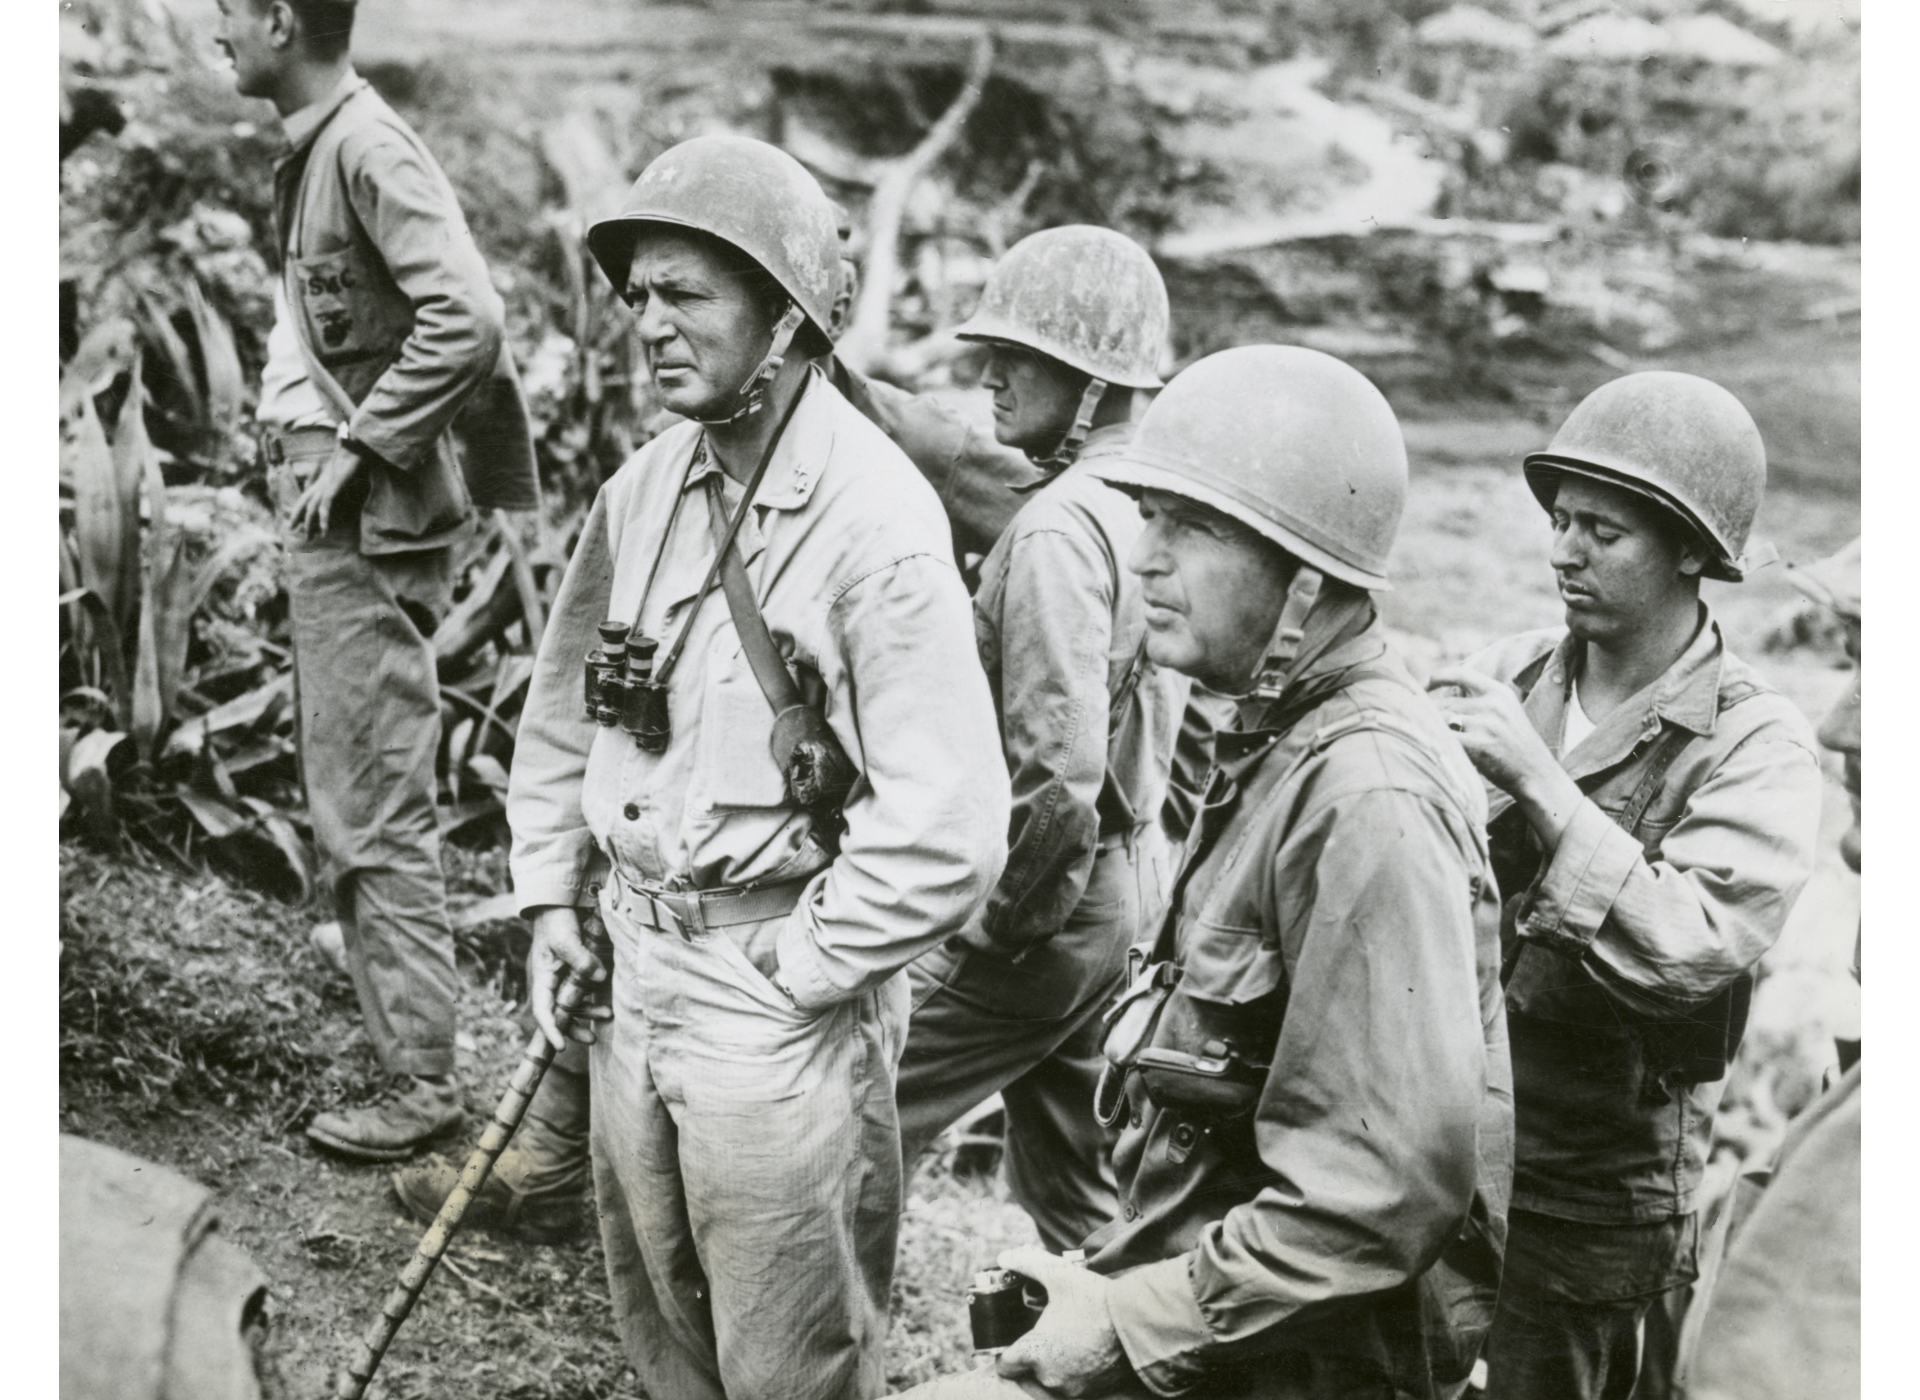 One of the last photographs taken of Lieutenant General Simon Bolivar Buckner (foreground, holding camera), he watches an assault from a ridge on Okinawa. US Marine Corps photograph. The National WWII Museum, Gift of Dylan Utley, Accession #2012.019.404